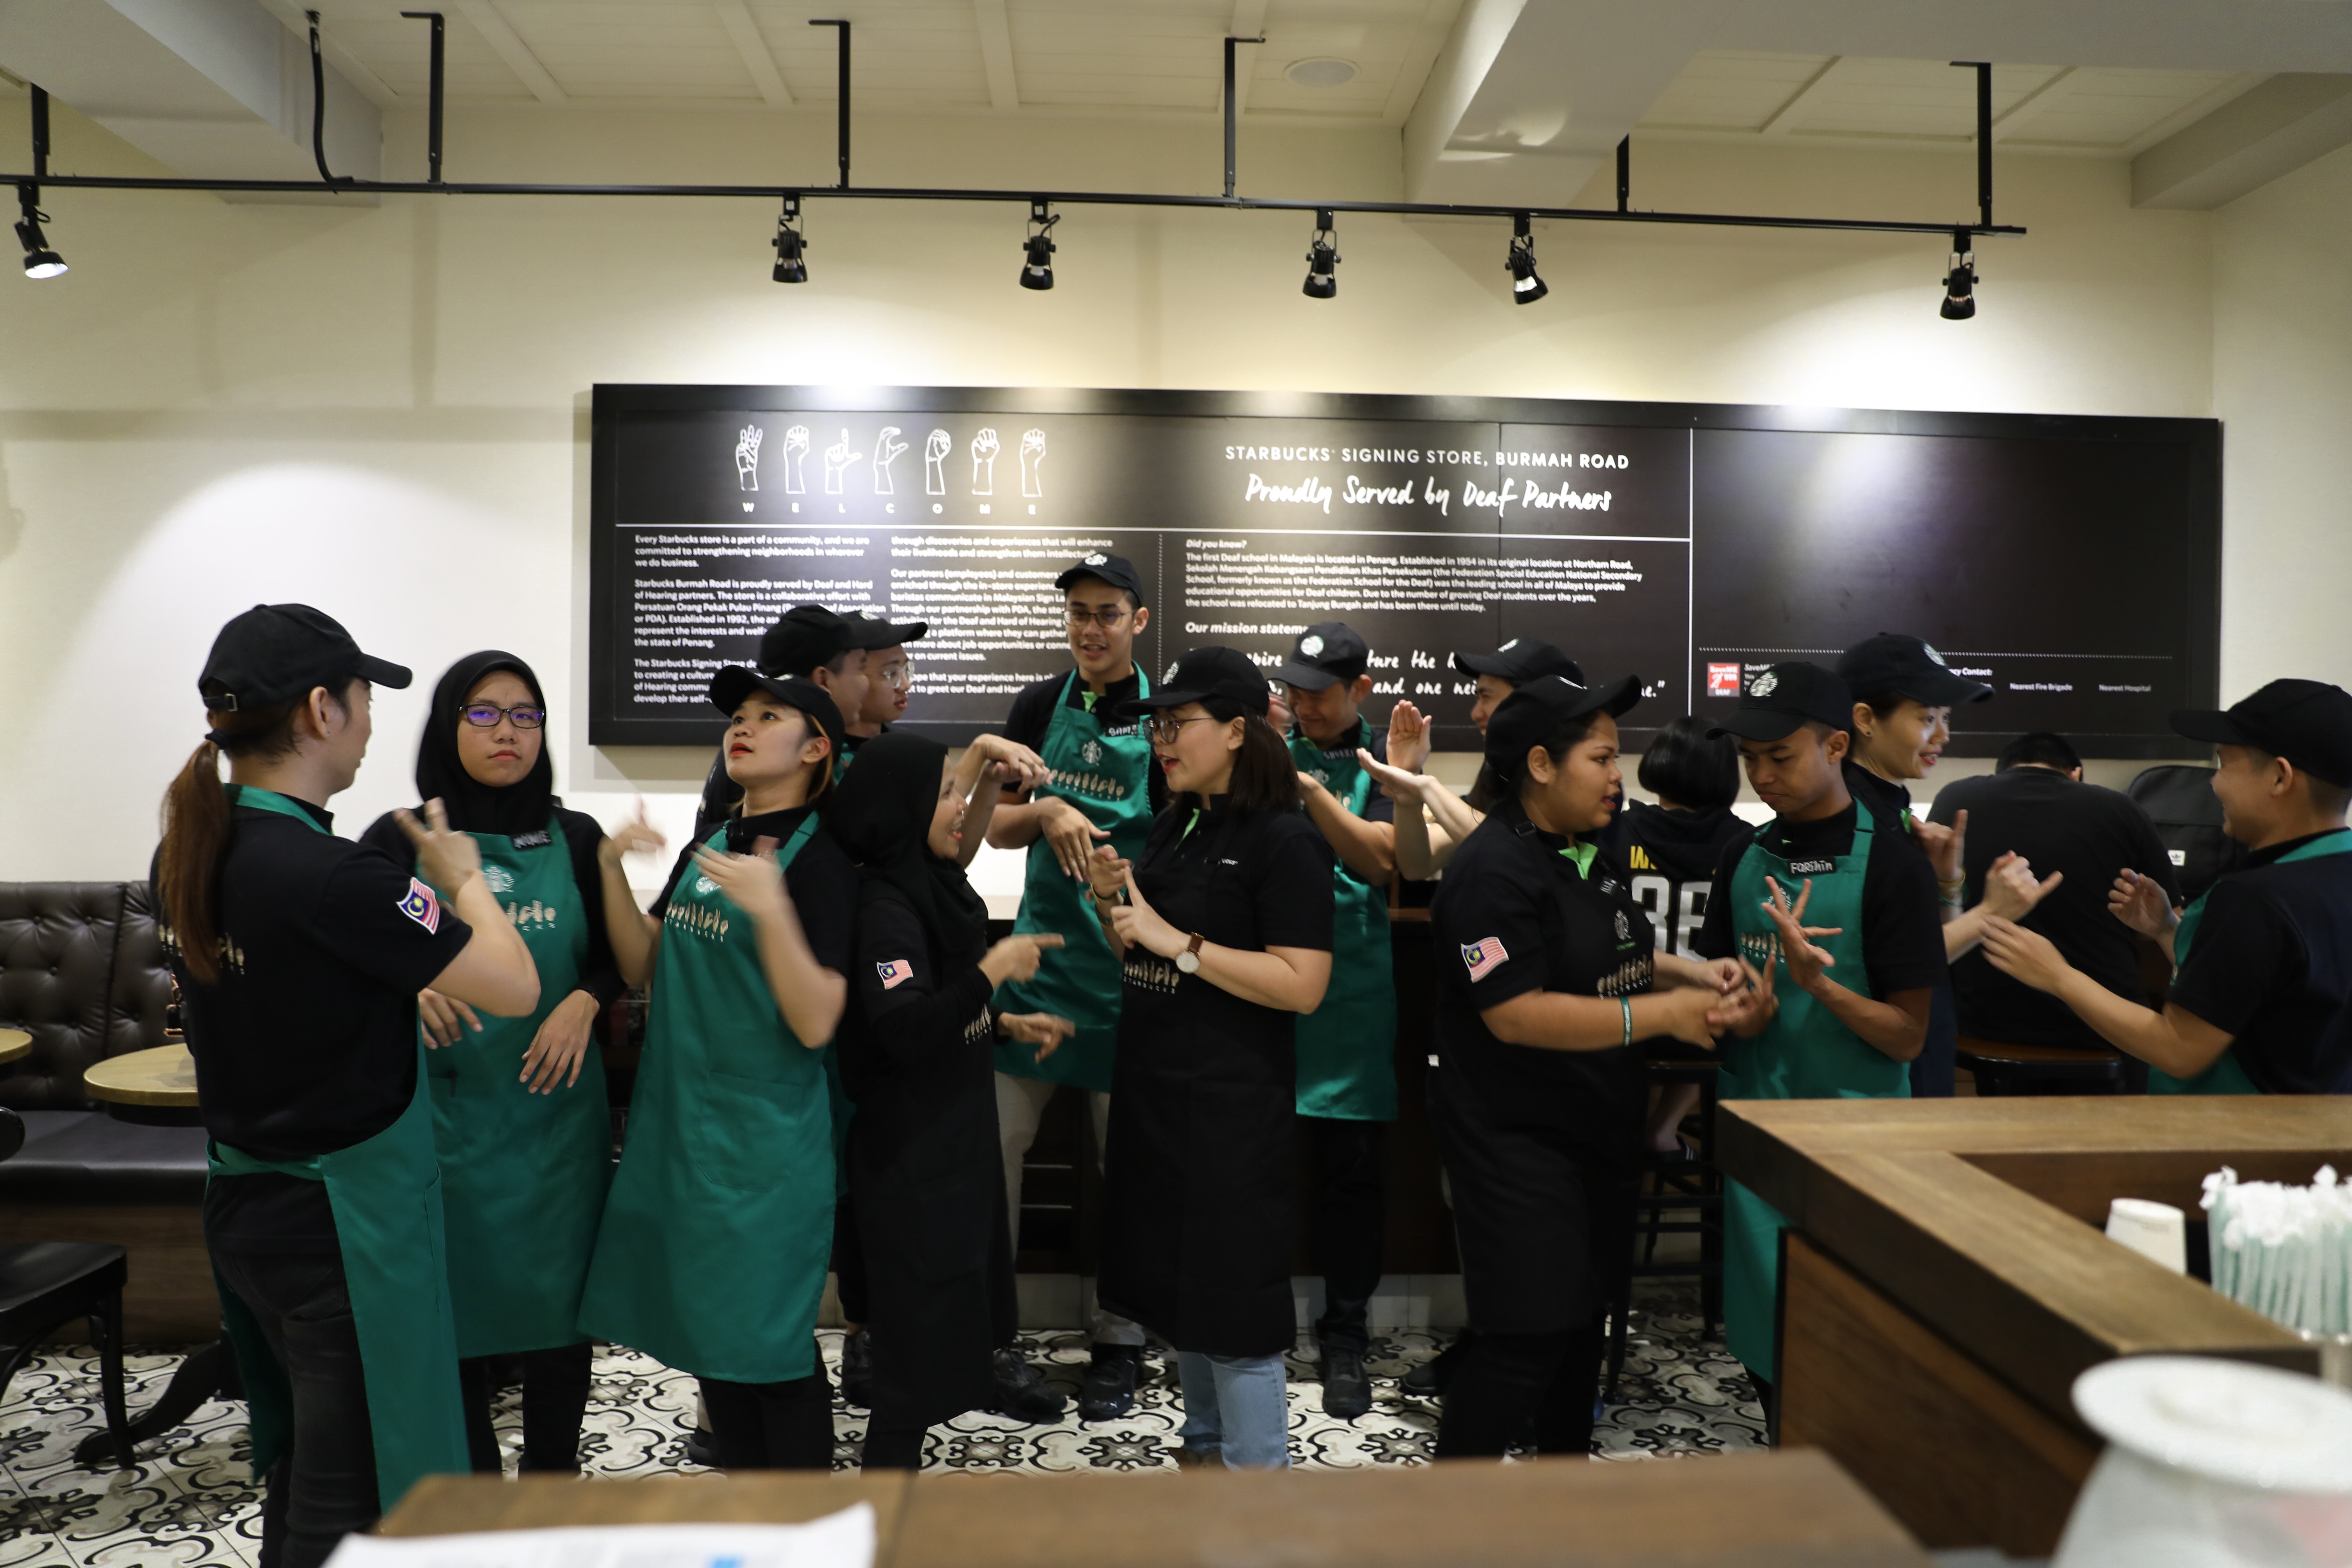 Starbucks Opens World’s Fourth Signing Store in Penang